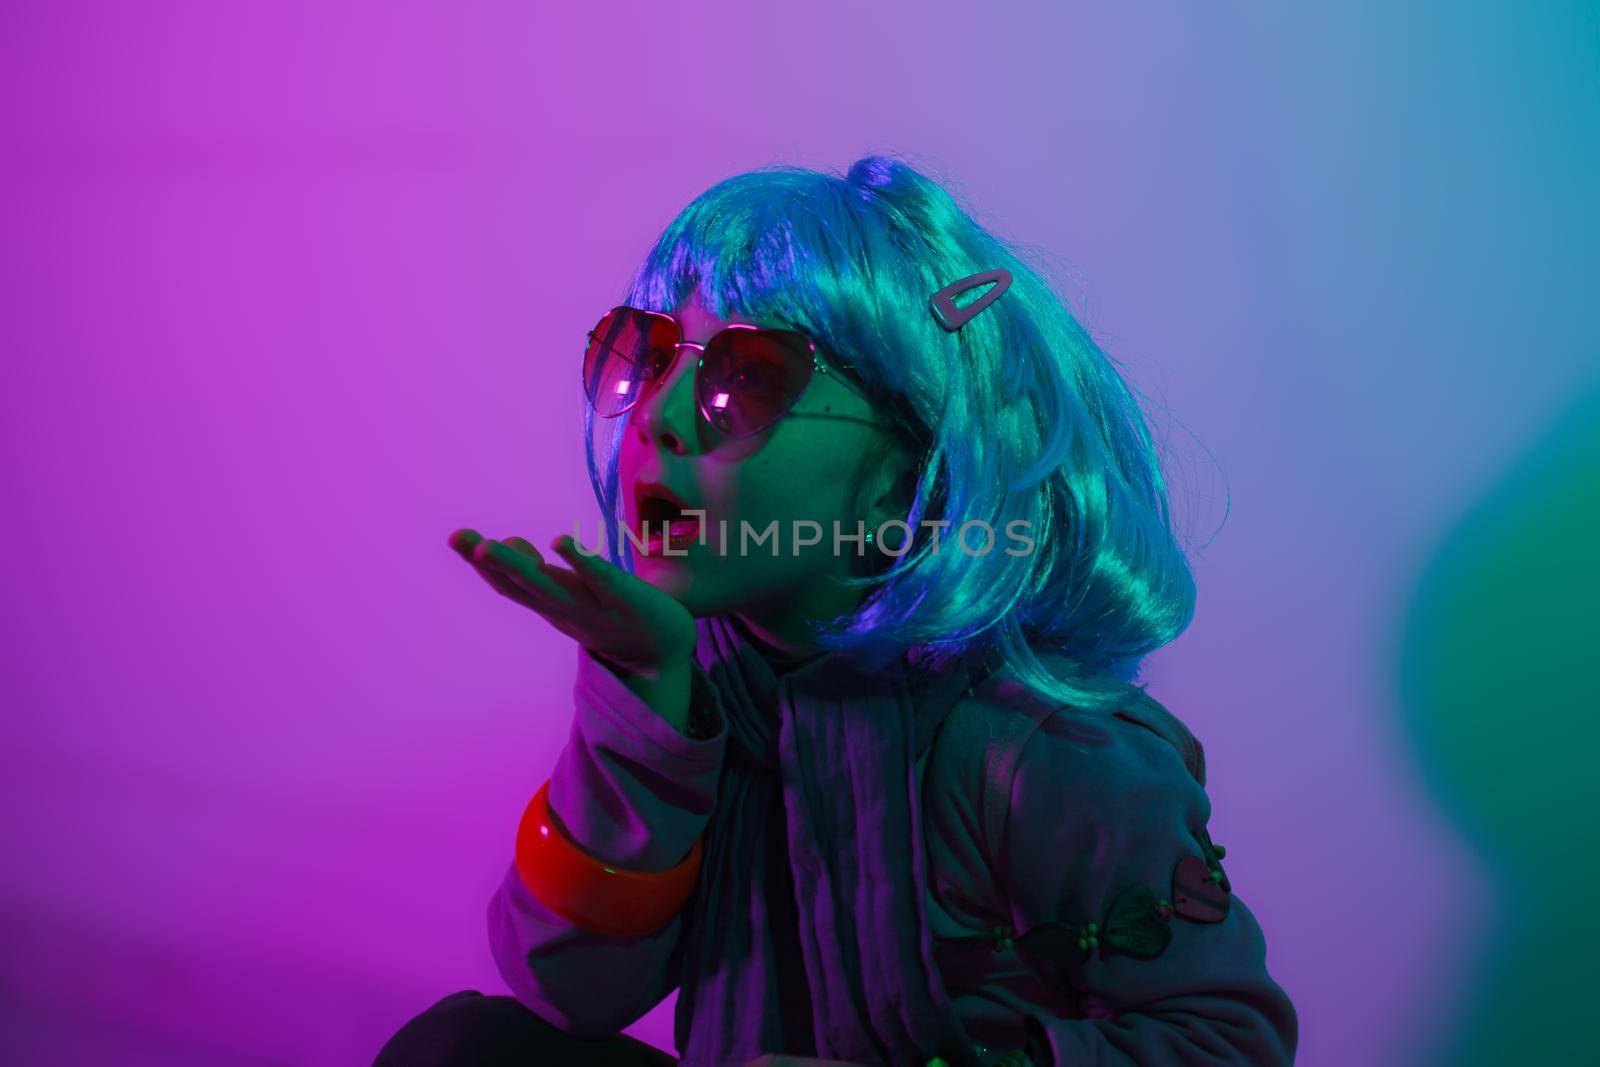 A glamour little girl posing for a photo portrait while wearing a colorful wig on pink background